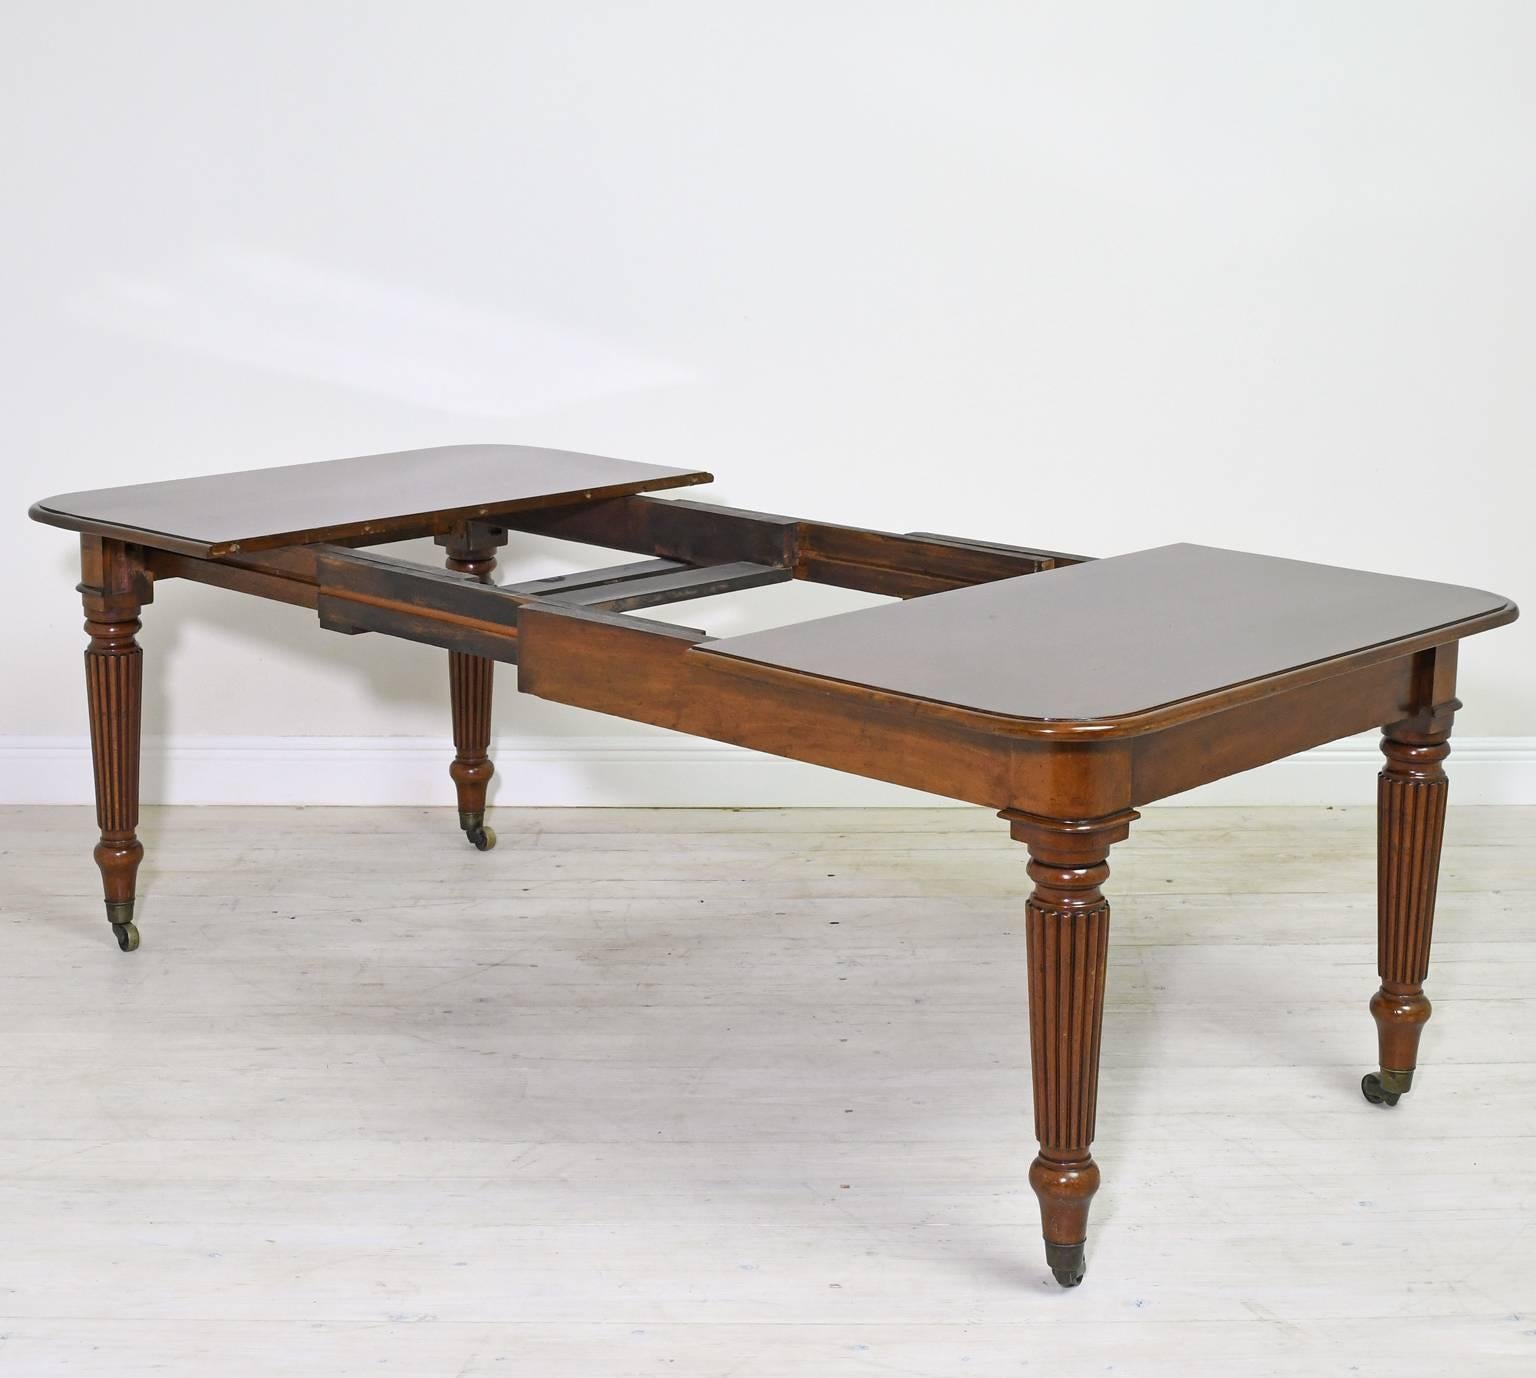 Polished 19th Century English Victorian Extension Dining Table in Mahogany with Leaves